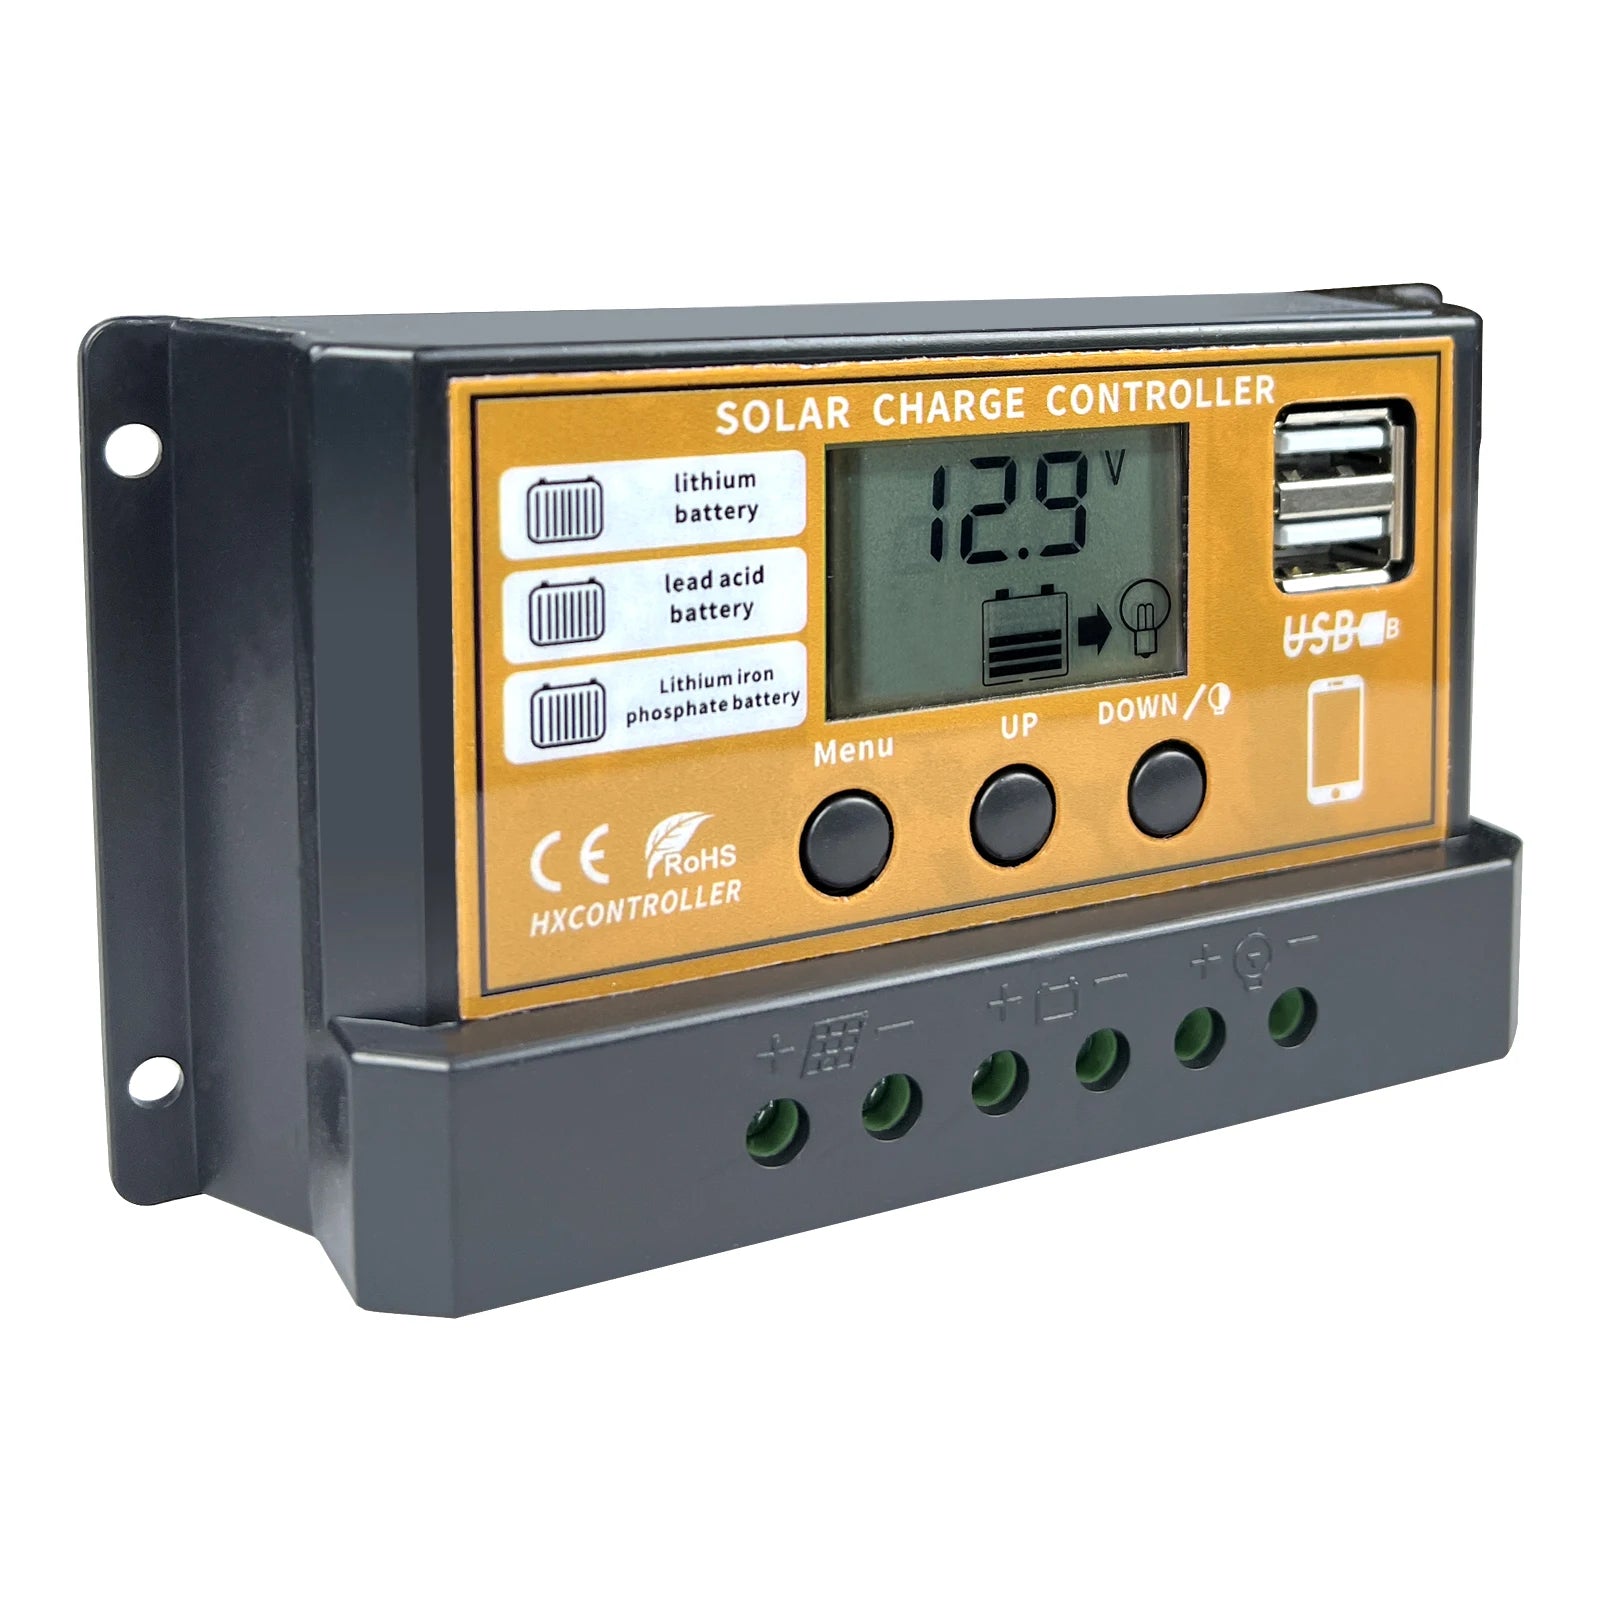 MPPT 720W 480W 360W 240W Solar Charge Controller, Regulates solar power for 12V/24V lithium batteries with PWM technology.